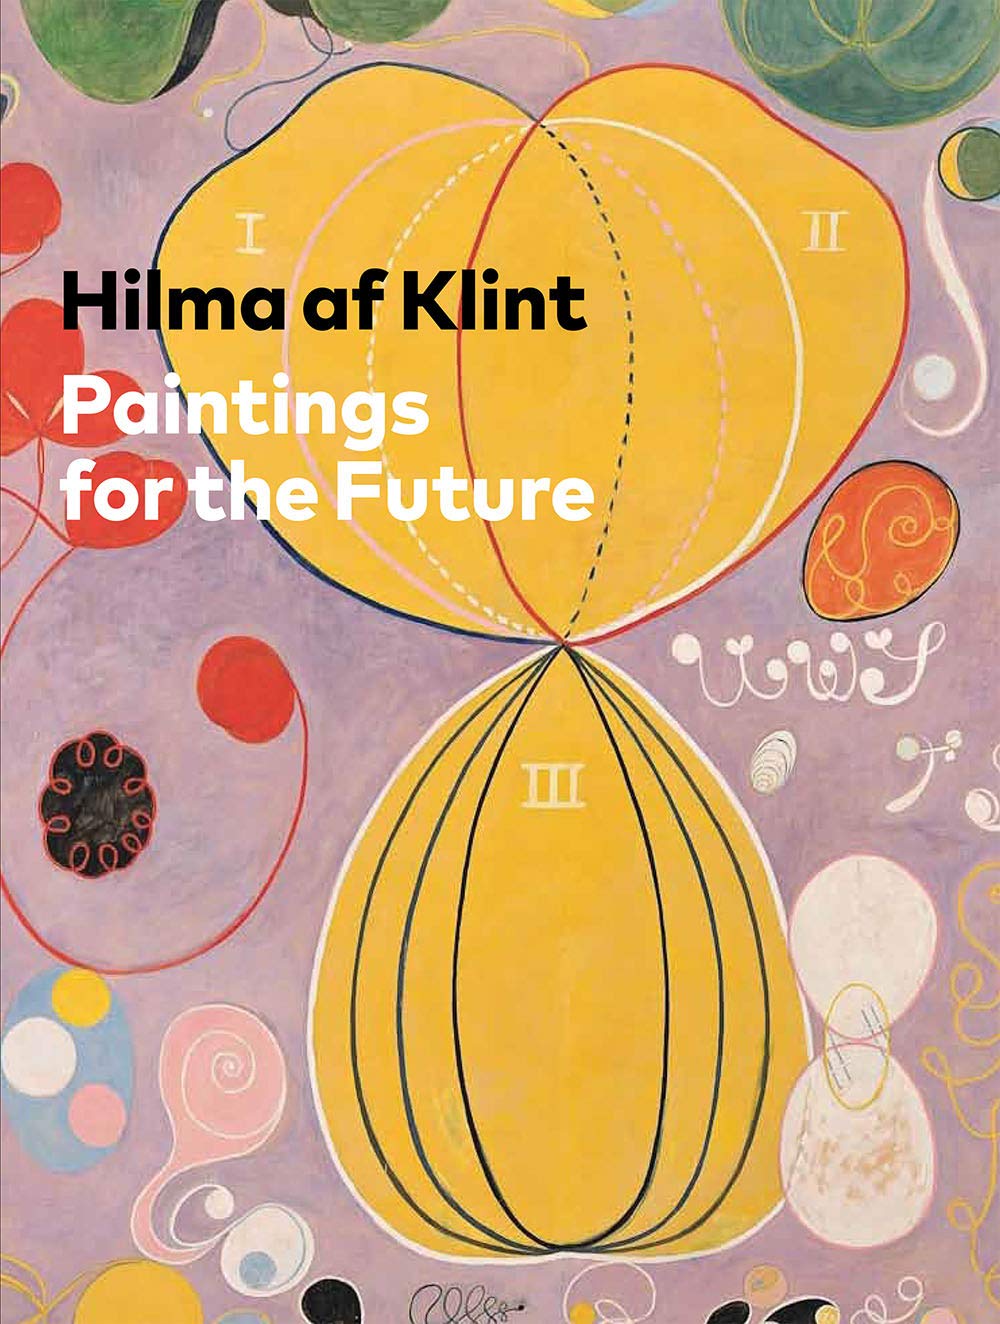 Hilma af Klint's daring abstractions exert a mystical magnetism. Her boldly colorful works, many of them large-scale, reflect an ambitious, spiritually informed attempt to chart an invisible, totalizing world order through a synthesis of natural and geometric forms, textual elements and esoteric symbolism.